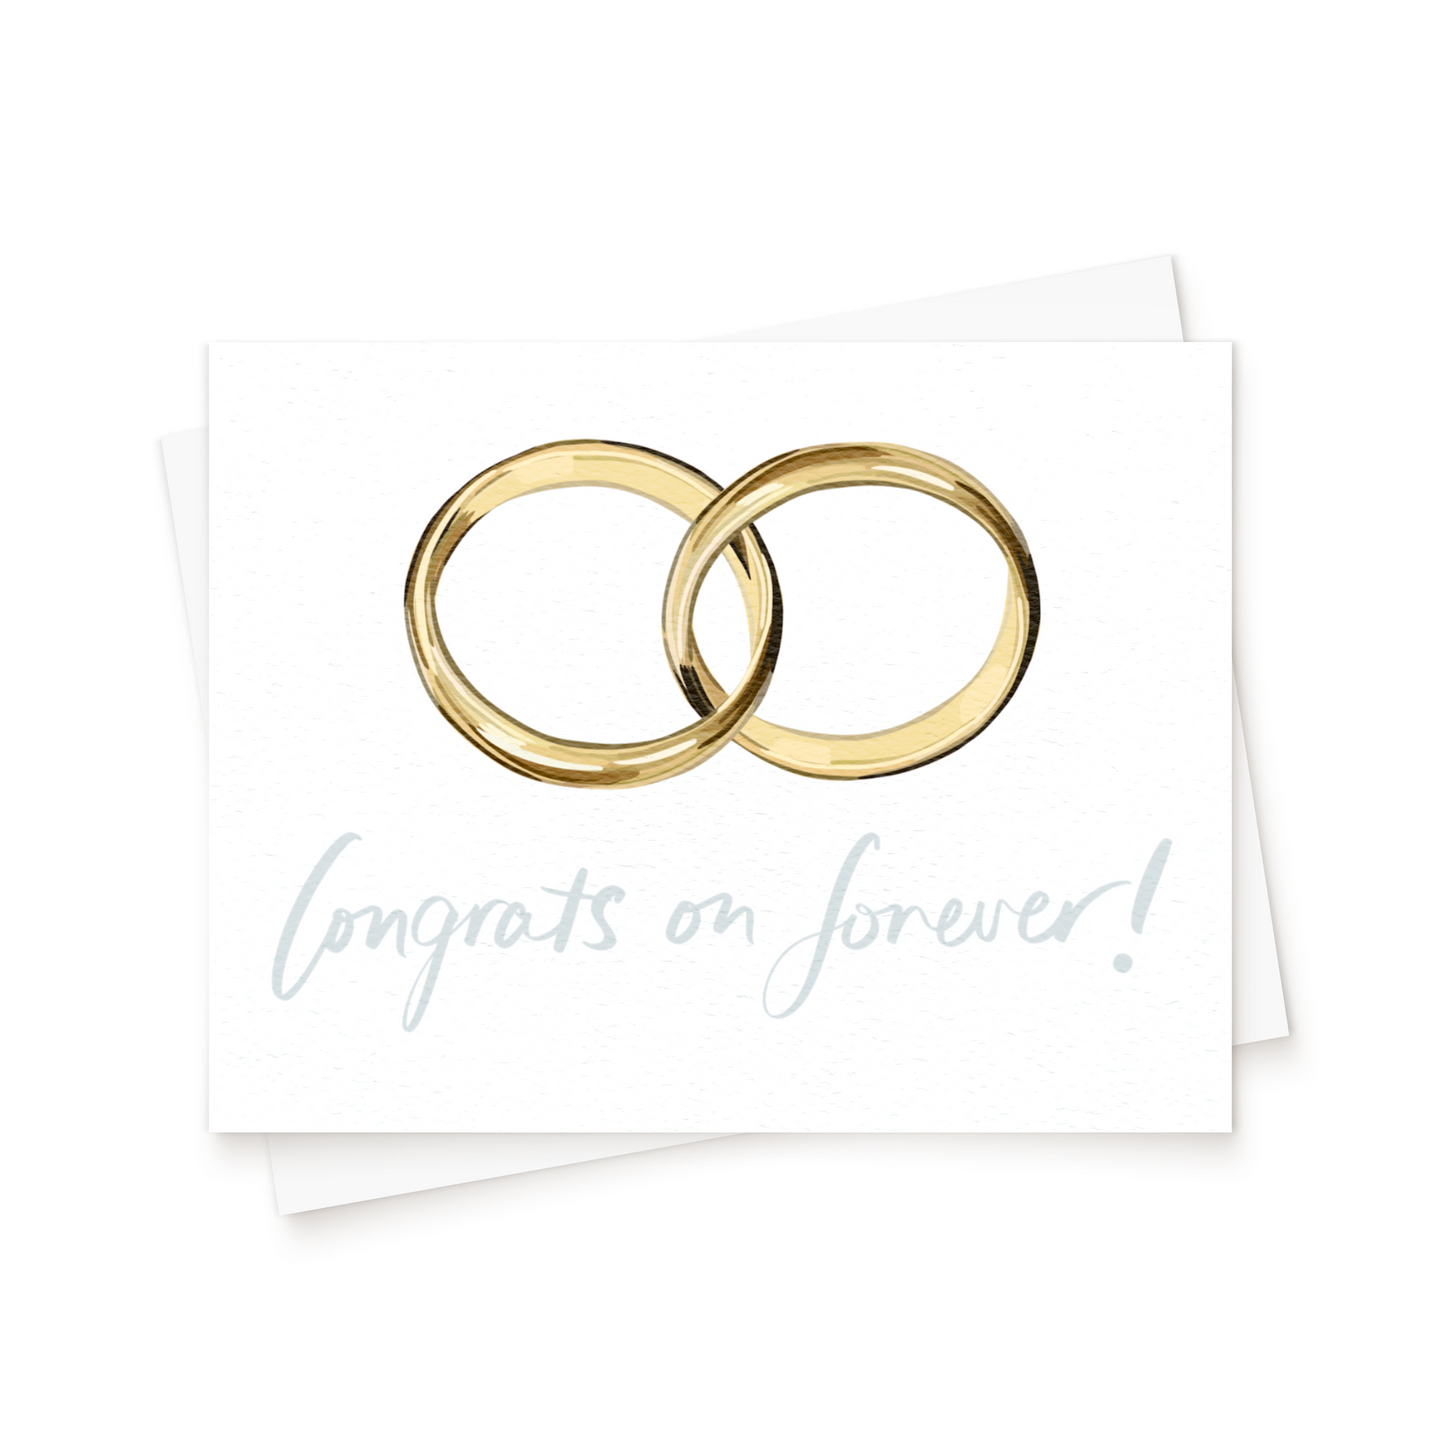 The Wedding Rings Card